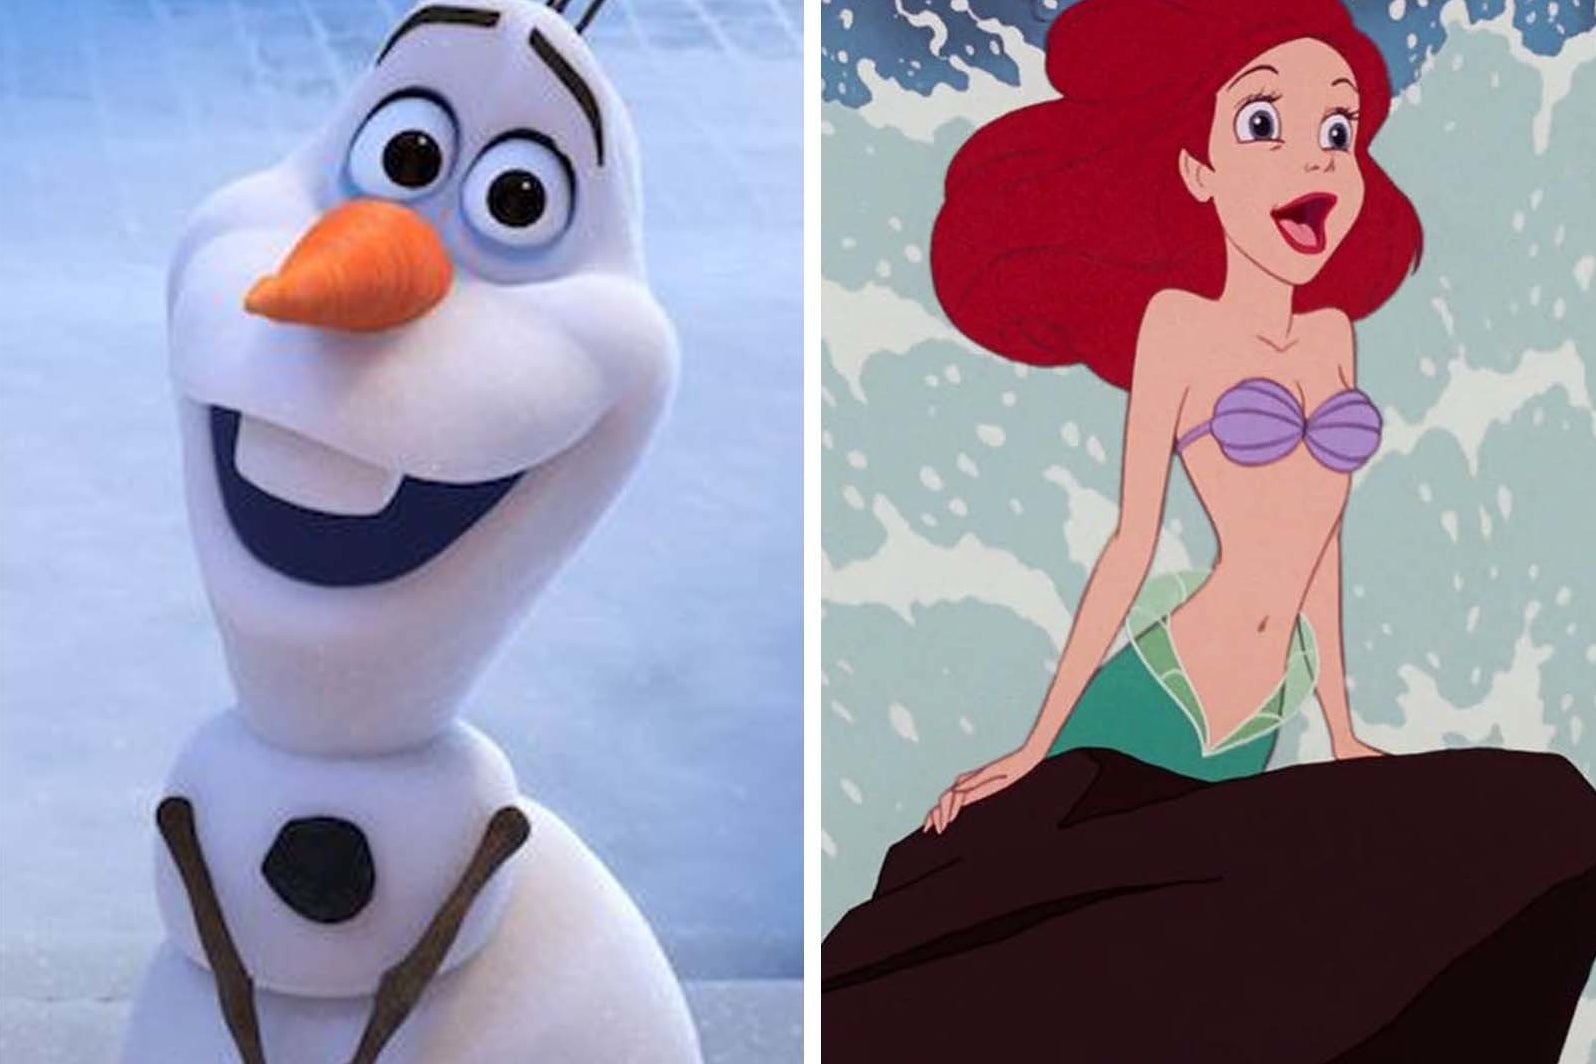 33 Heartwarming Disney Quotes That’ll Accurate now Originate You Smile